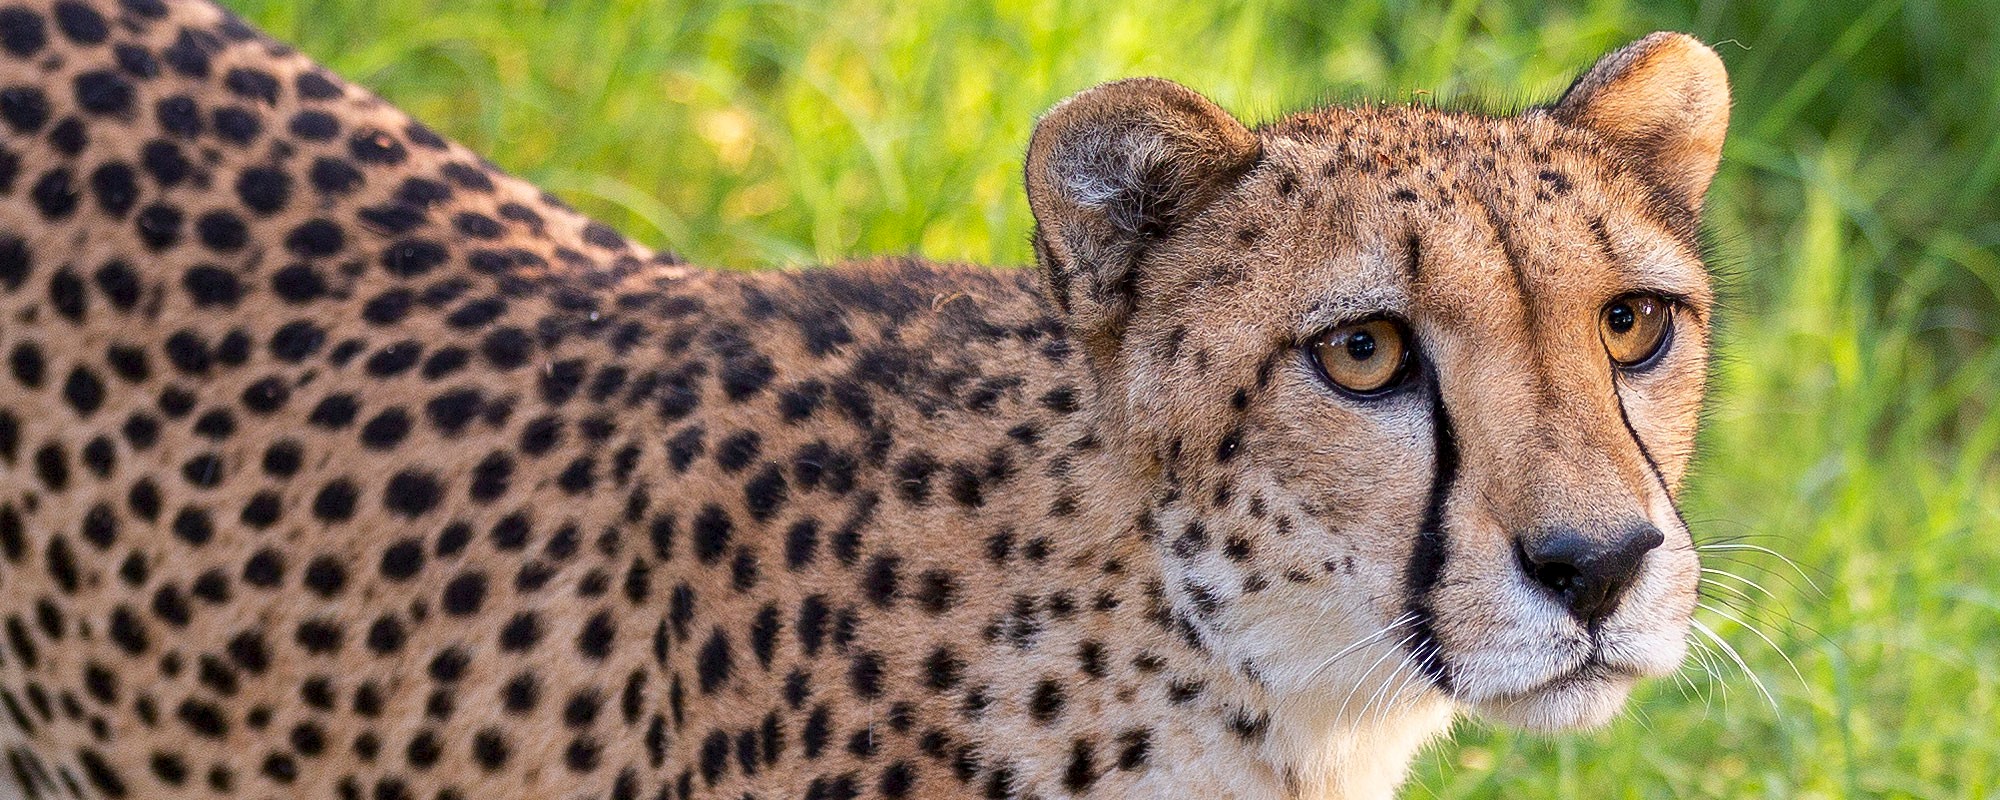 Any animal at The Living Desert can be symbolically adopted including cheetah, zebra, jaguar, giraffe, warthog and many more.